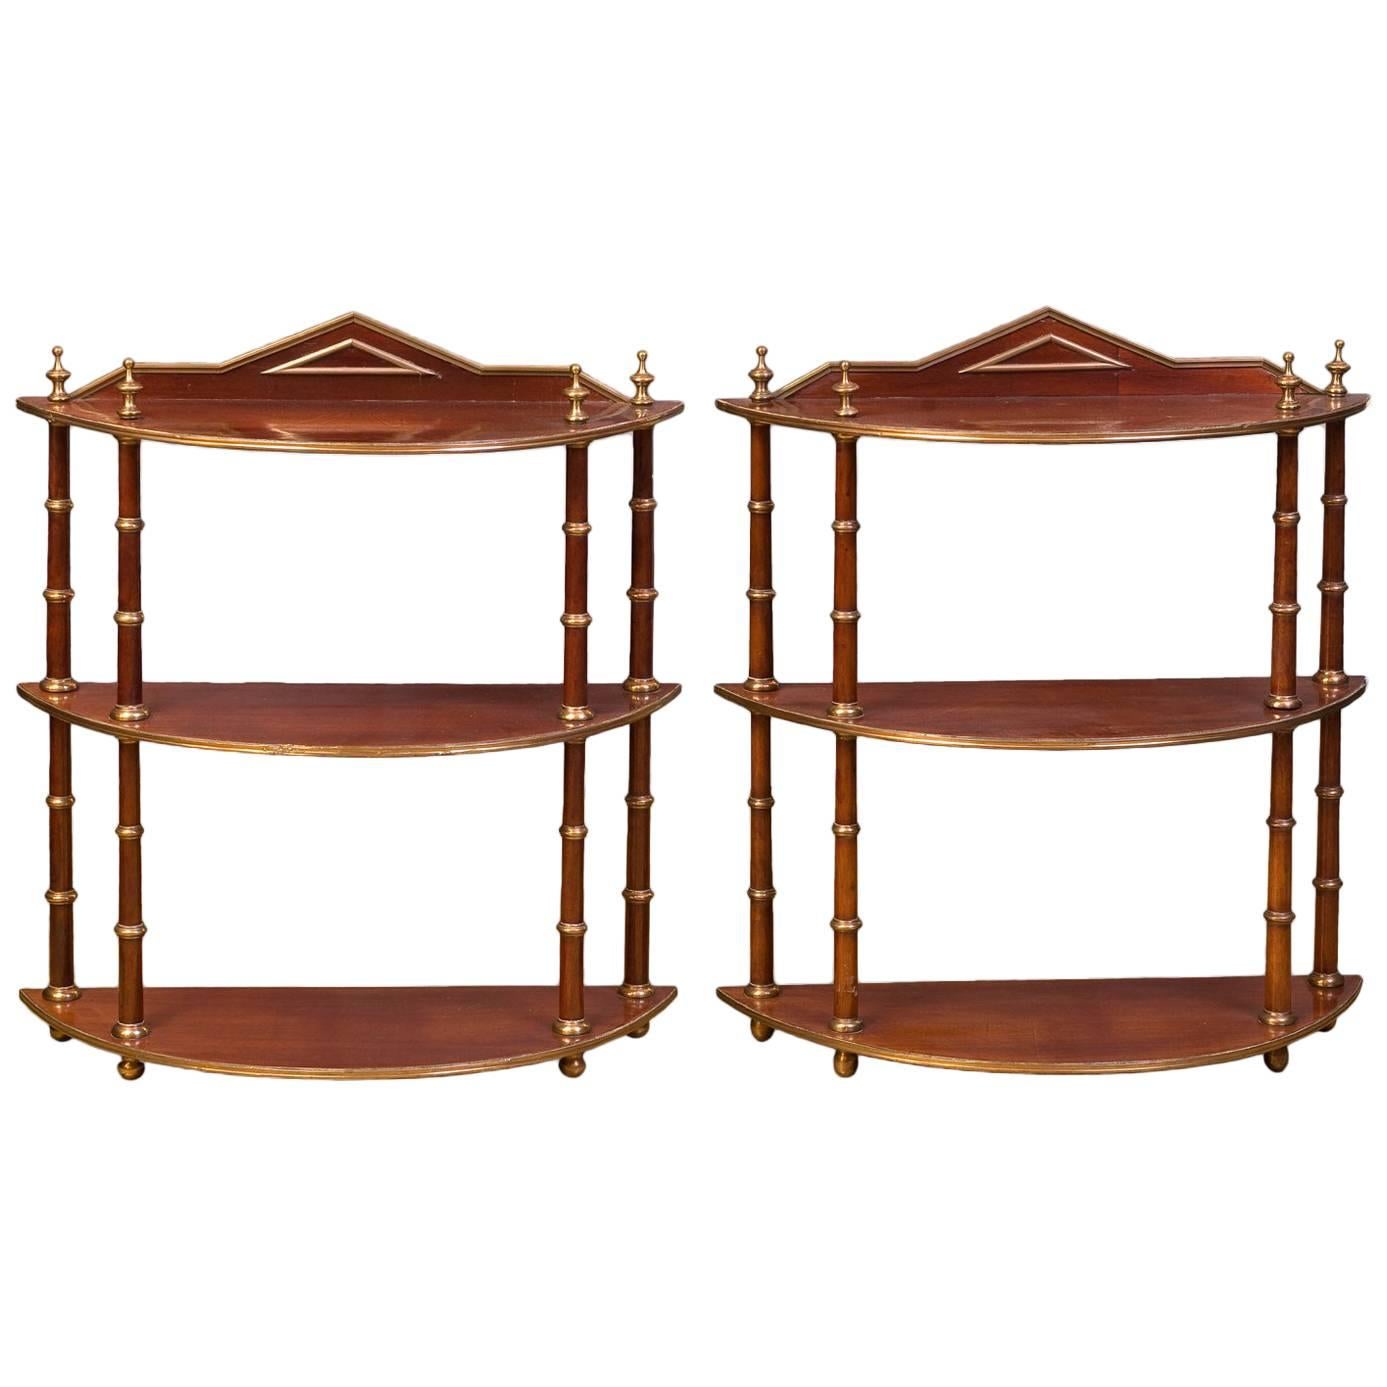 Nice Pair of Hanging Shelves Baltics, Mid-19th Century For Sale